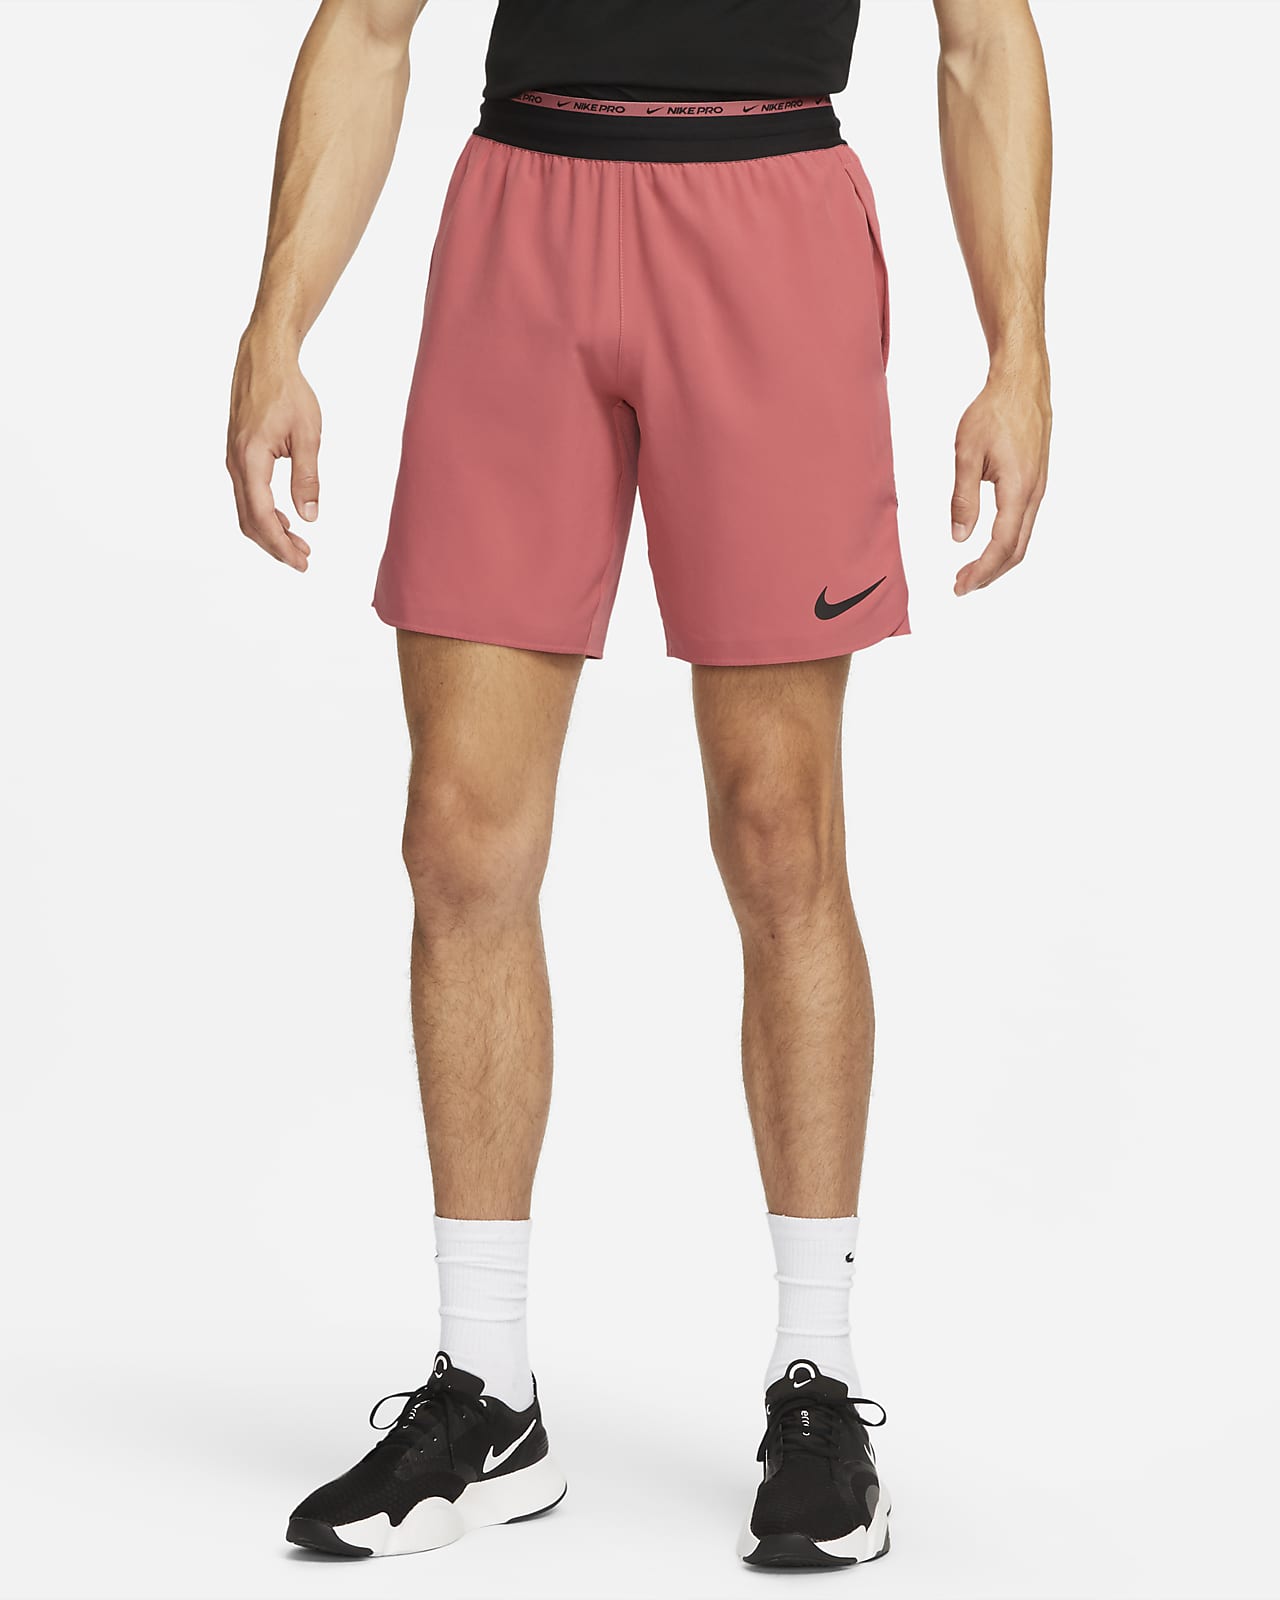 Nike Dri-FIT Flex Rep Pro Collection Men's 20cm (approx.) Unlined Training Shorts